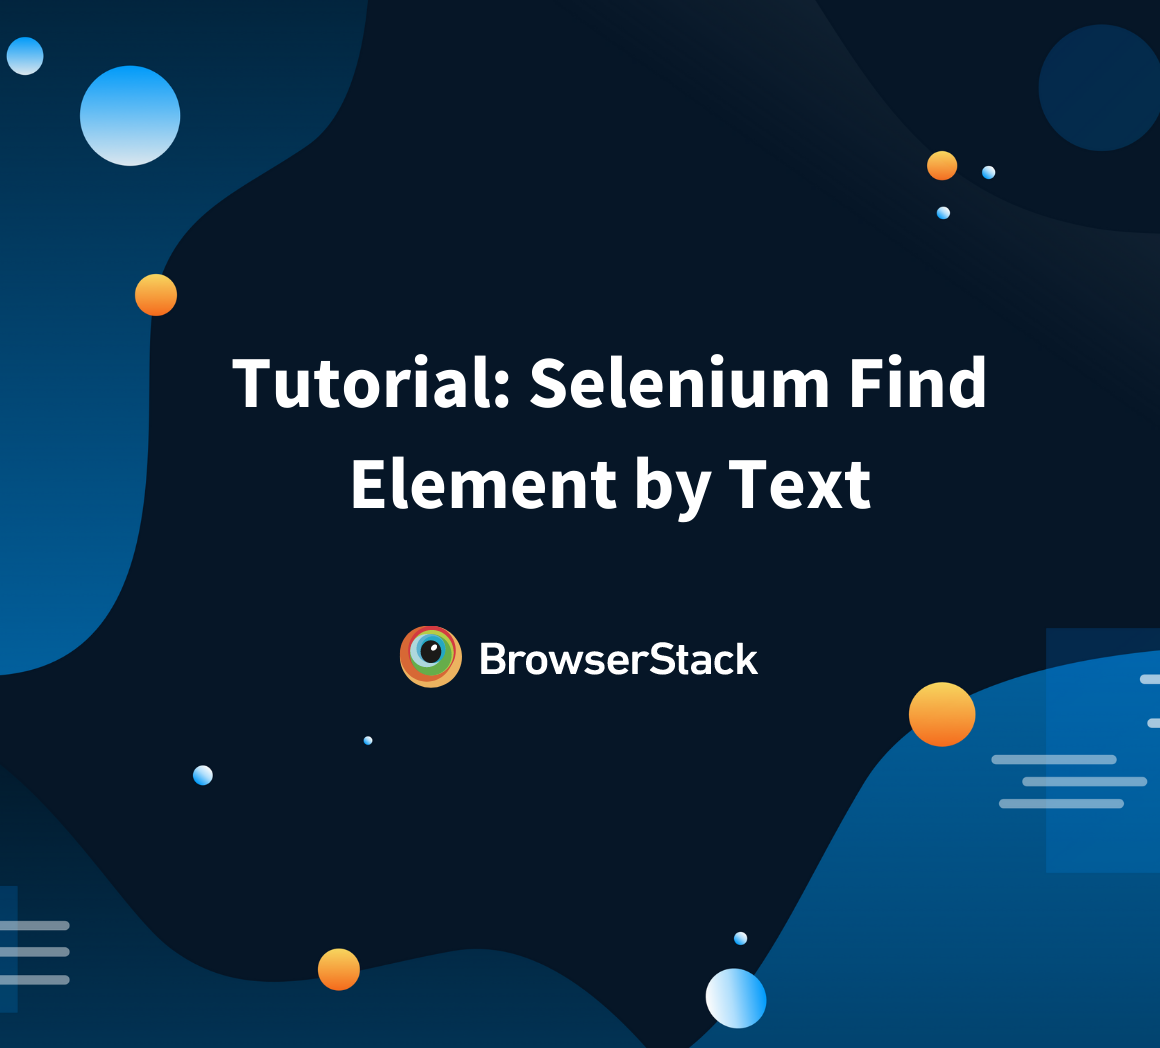 Tutorial: Selenium Find Element by Text